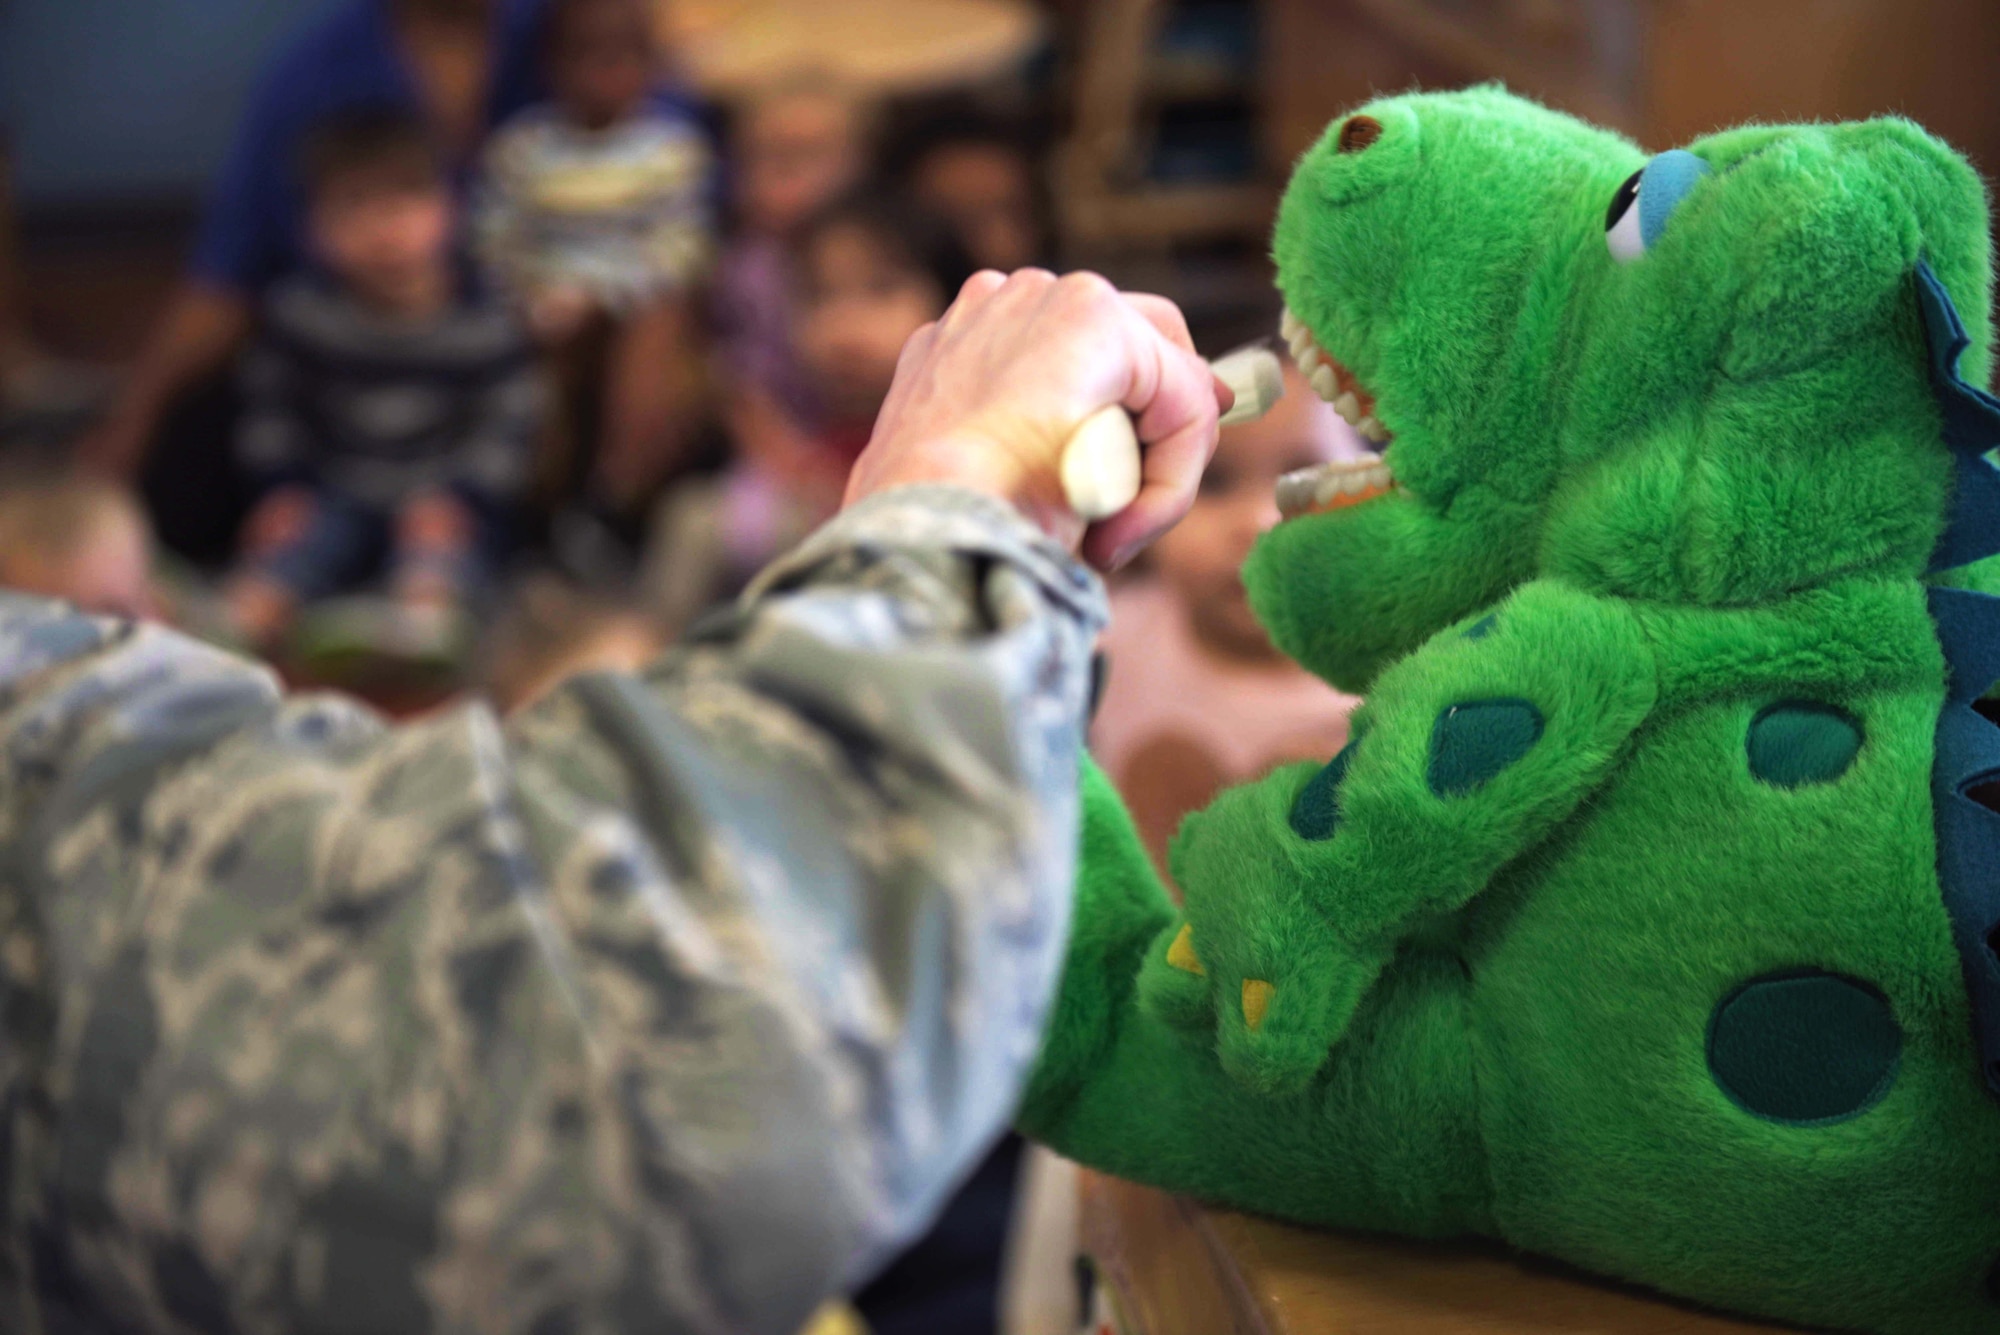 U.S. Air Force Maj. Nicholas Einbender, 325th Medical Group dentist, pretends to brush the teeth of a puppet during a dental demonstration at Tyndall Air Force Base, Florida, Feb. 27, 2020. February is National Children's Dental Health Month, and the 325th MDG's dental team reached out to the 325th Force Support Squadron's Child and Youth Program Center (formerly known as the Child Development Center) to teach young children the importance of brushing and flossing teeth. (U.S. Air Force photo by Staff Sgt. Magen M. Reeves)